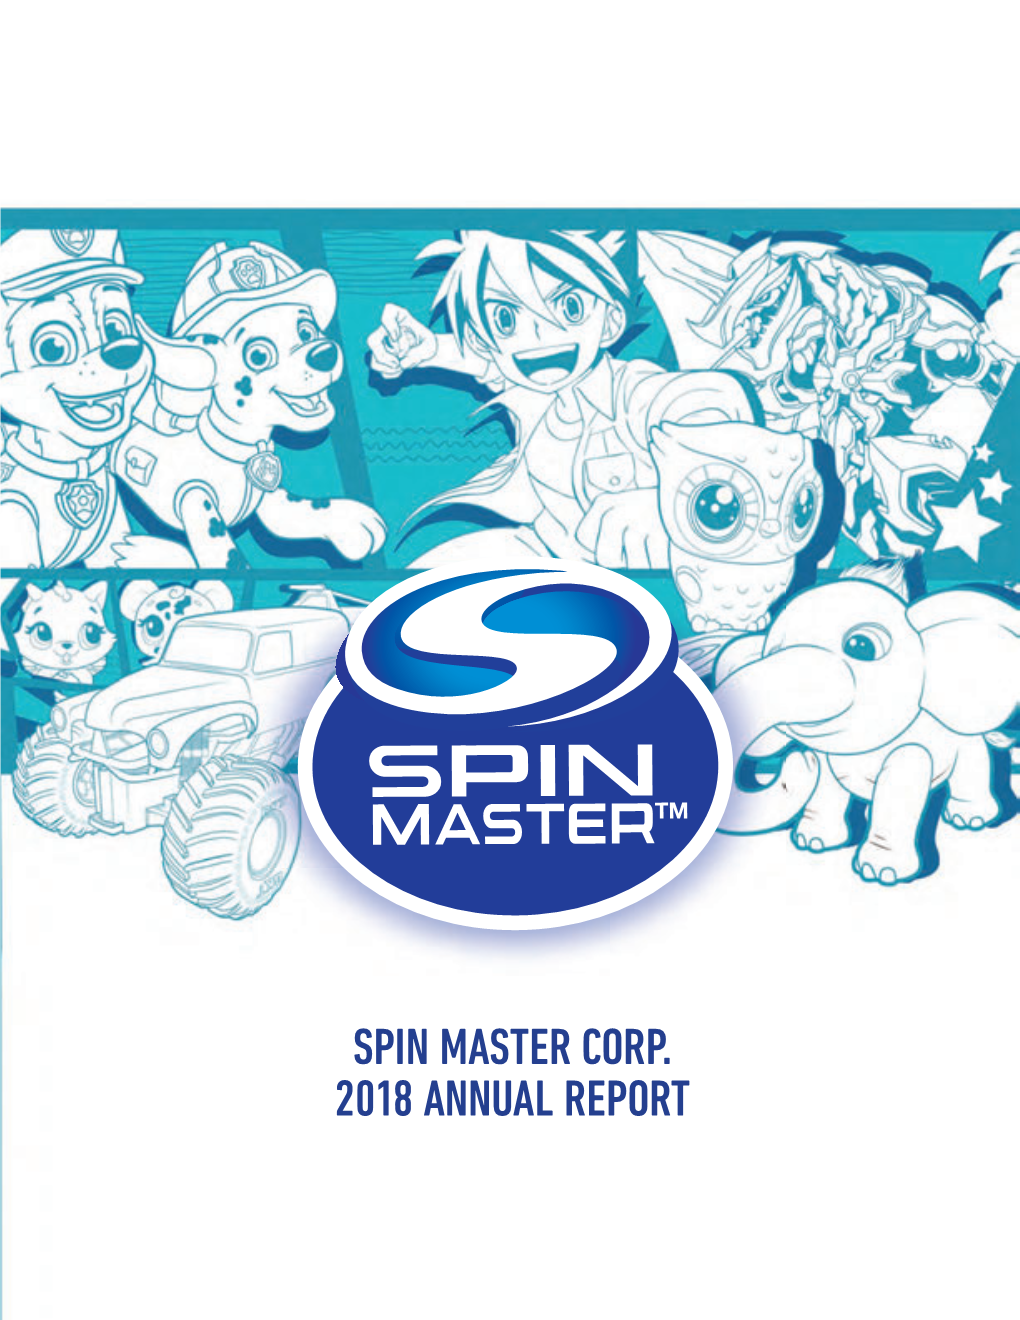 Spin Master Corp. 2018 Annual Report